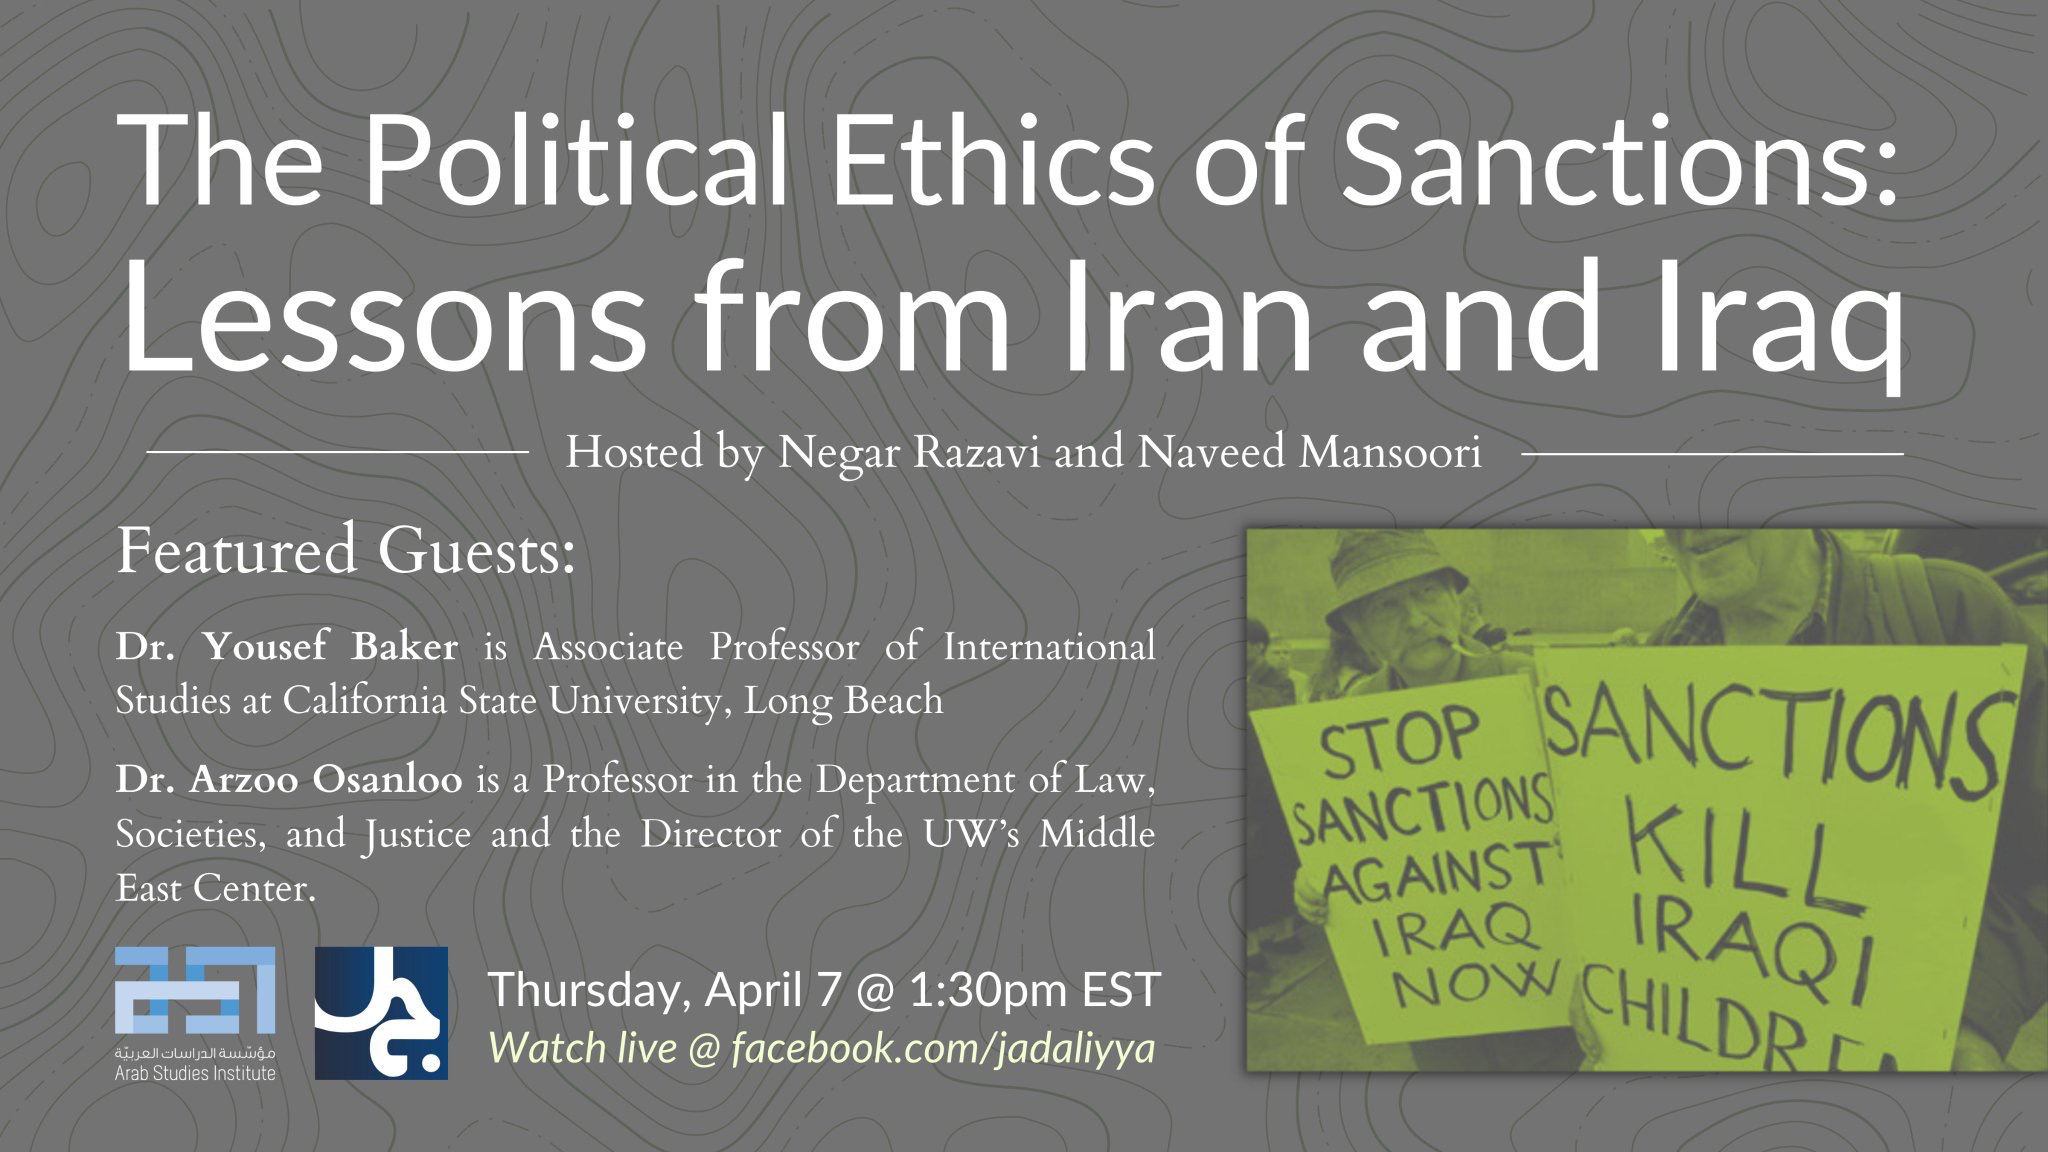 Jadaliyya - The Political Ethics of Sanctions: Lessons from Iran and Iraq  (Video)